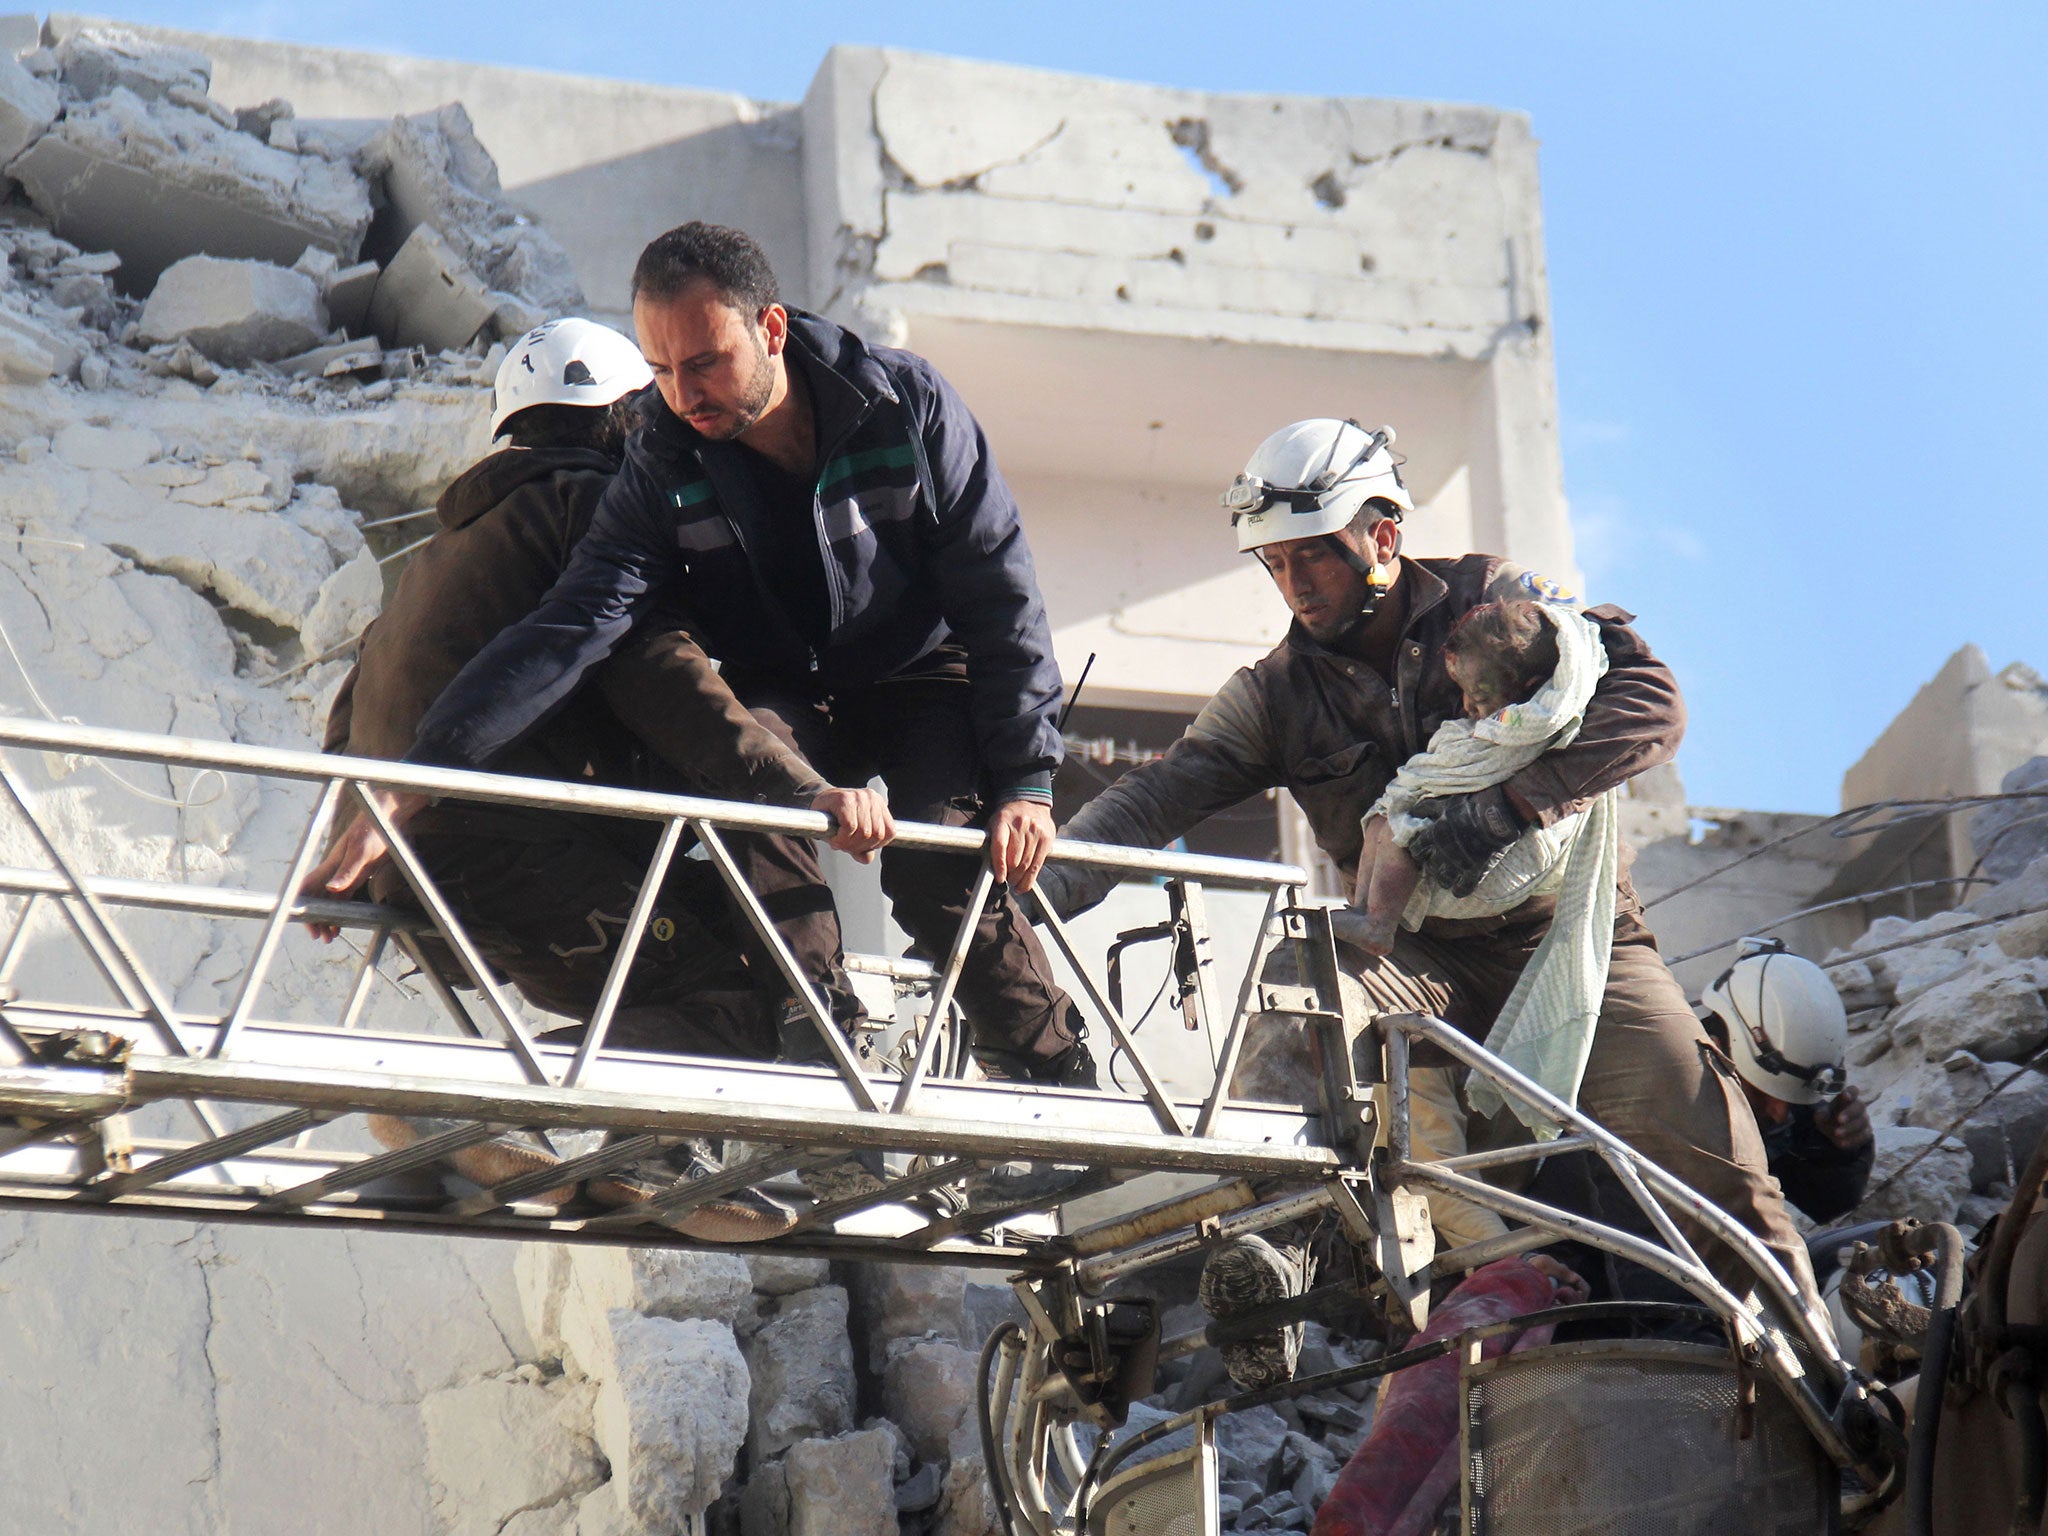 Syrian Civil Defence members evacuate a toddler from the rubble of buildings destroyed following Russian air strikes a day earlier on the northwestern city of Idlib, on May 31, 2016